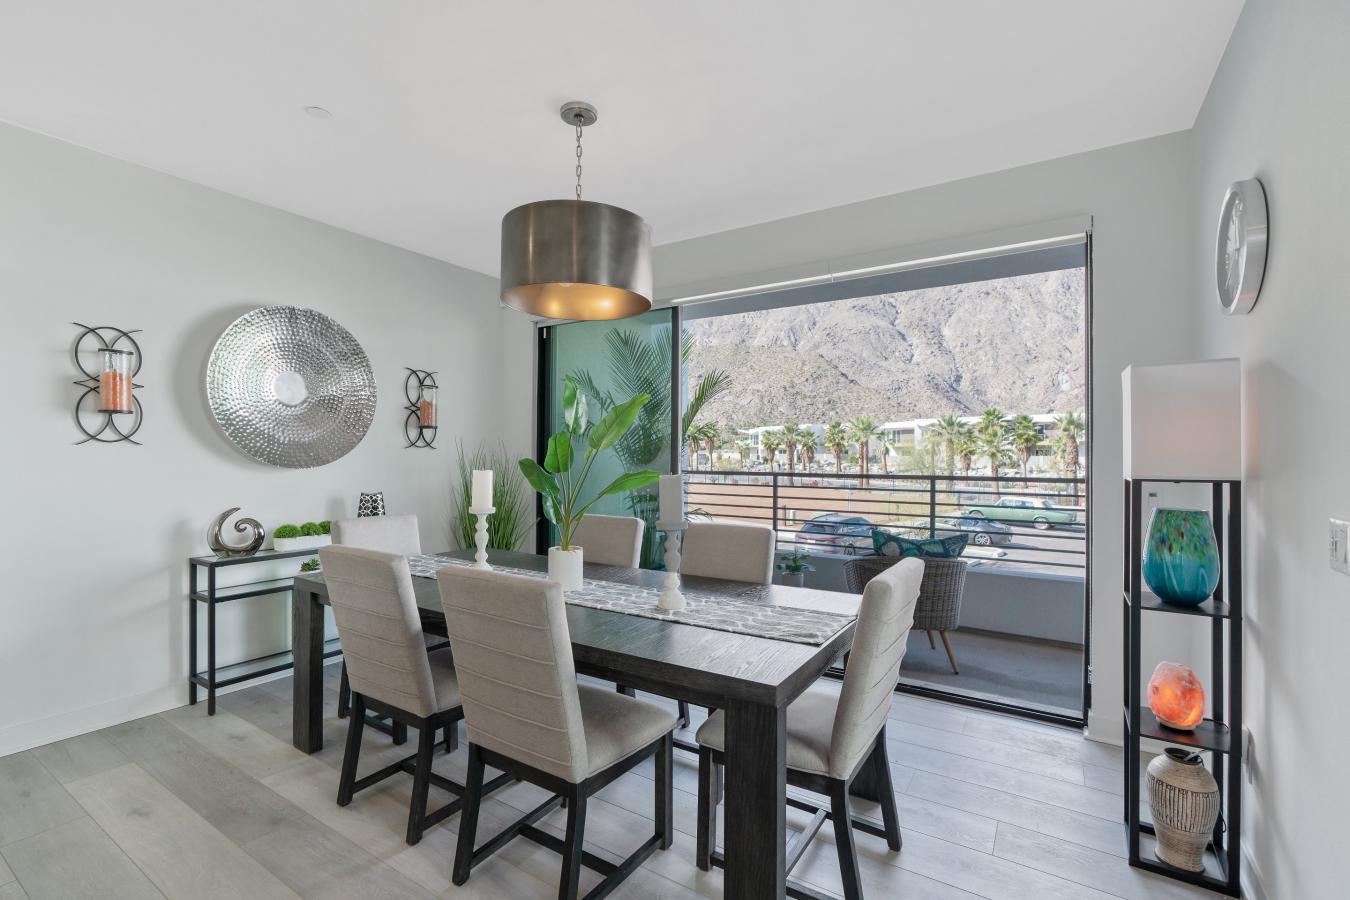 918 Cameron Center Drive, Palm Springs, California, 92262, United States, 2 Bedrooms Bedrooms, ,2 BathroomsBathrooms,Residential,For Sale,918 Cameron Center Drive,1465385